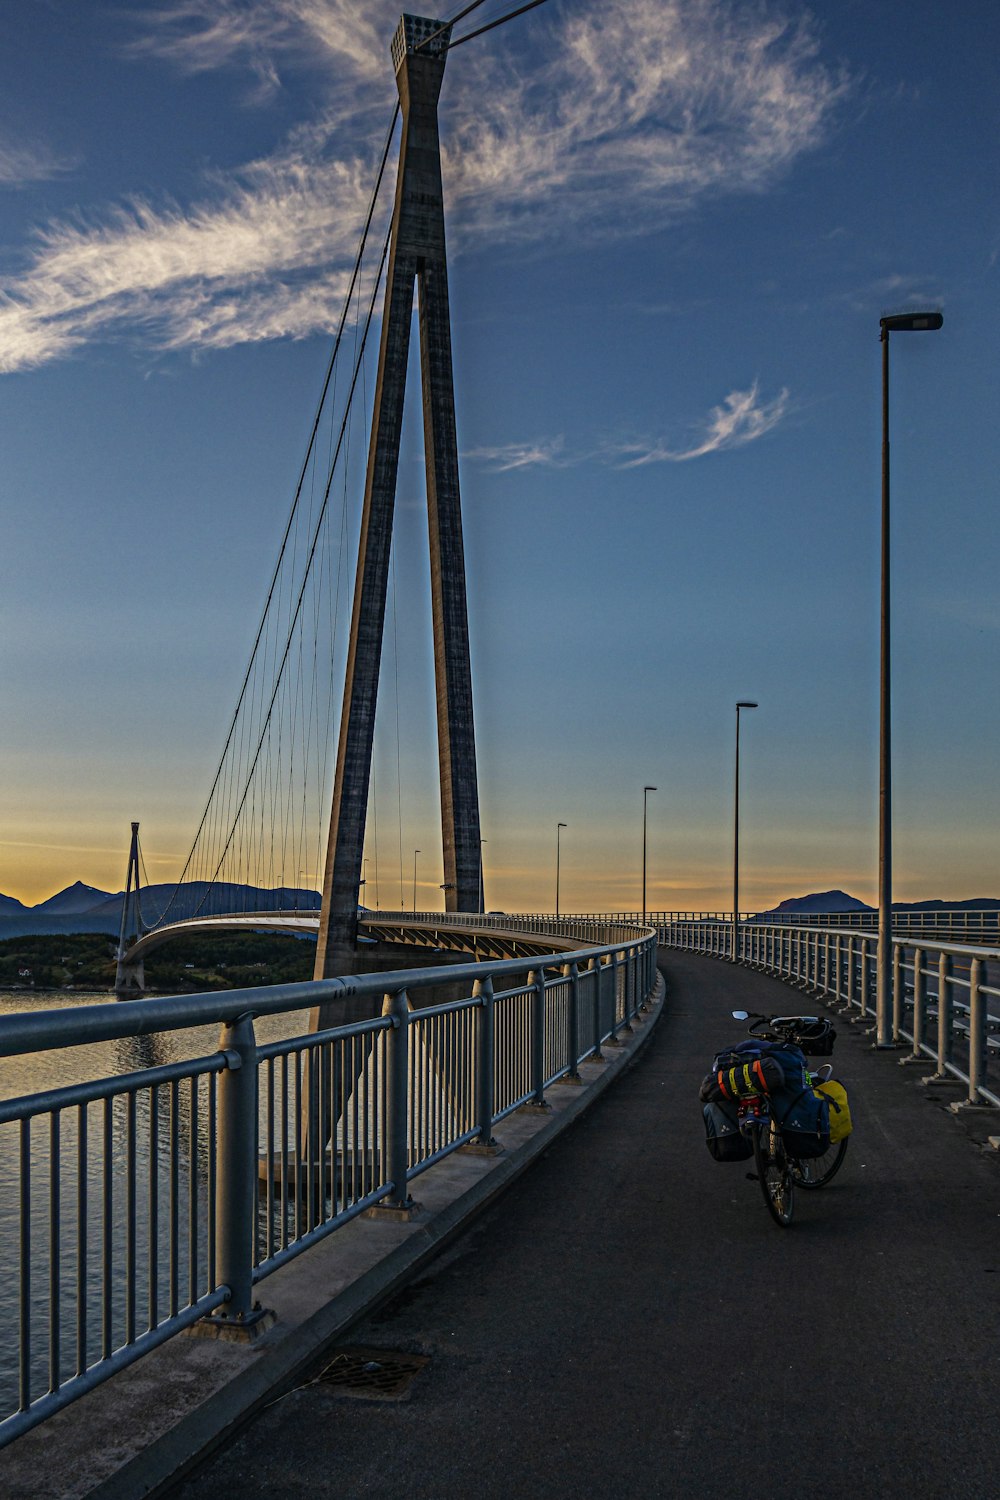 a bike parked on a bridge over a body of water